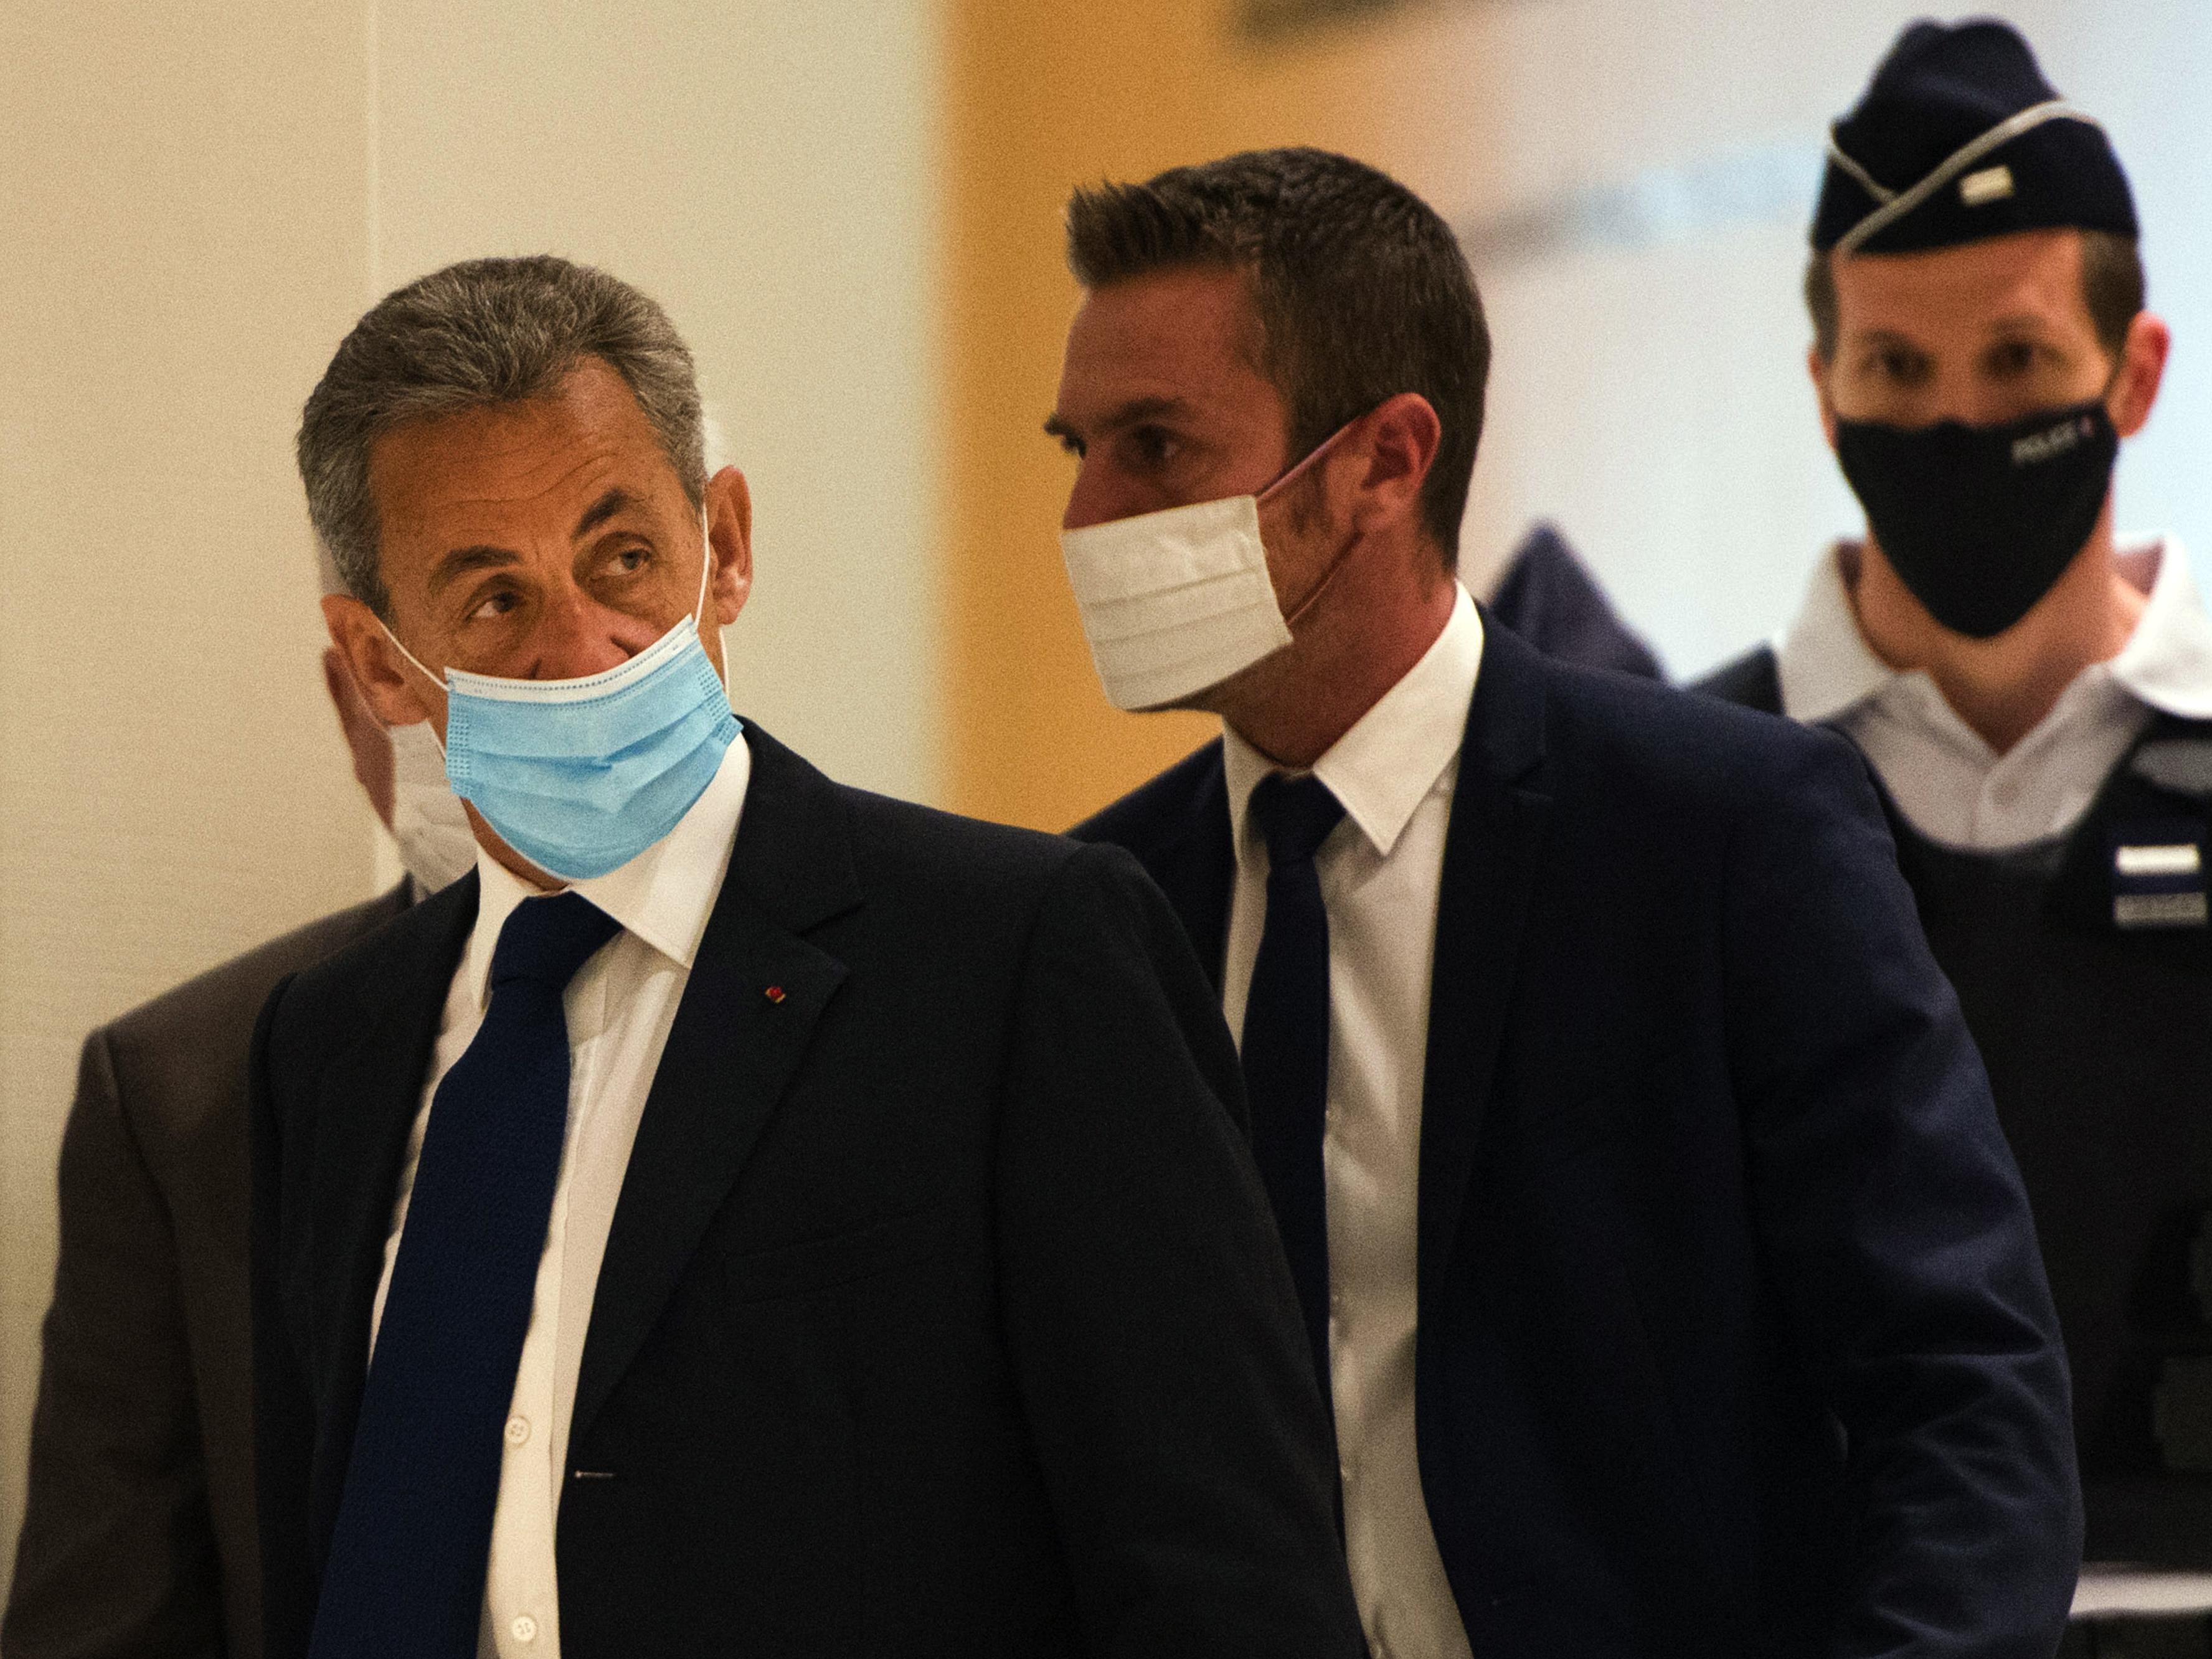 French former President Nicolas Sarkozy (left) arrives to hear the verdict in a corruption trial at Porte de Clichy court house in Paris on Monday. CREDIT: Bloomberg/Bloomberg via Getty Images